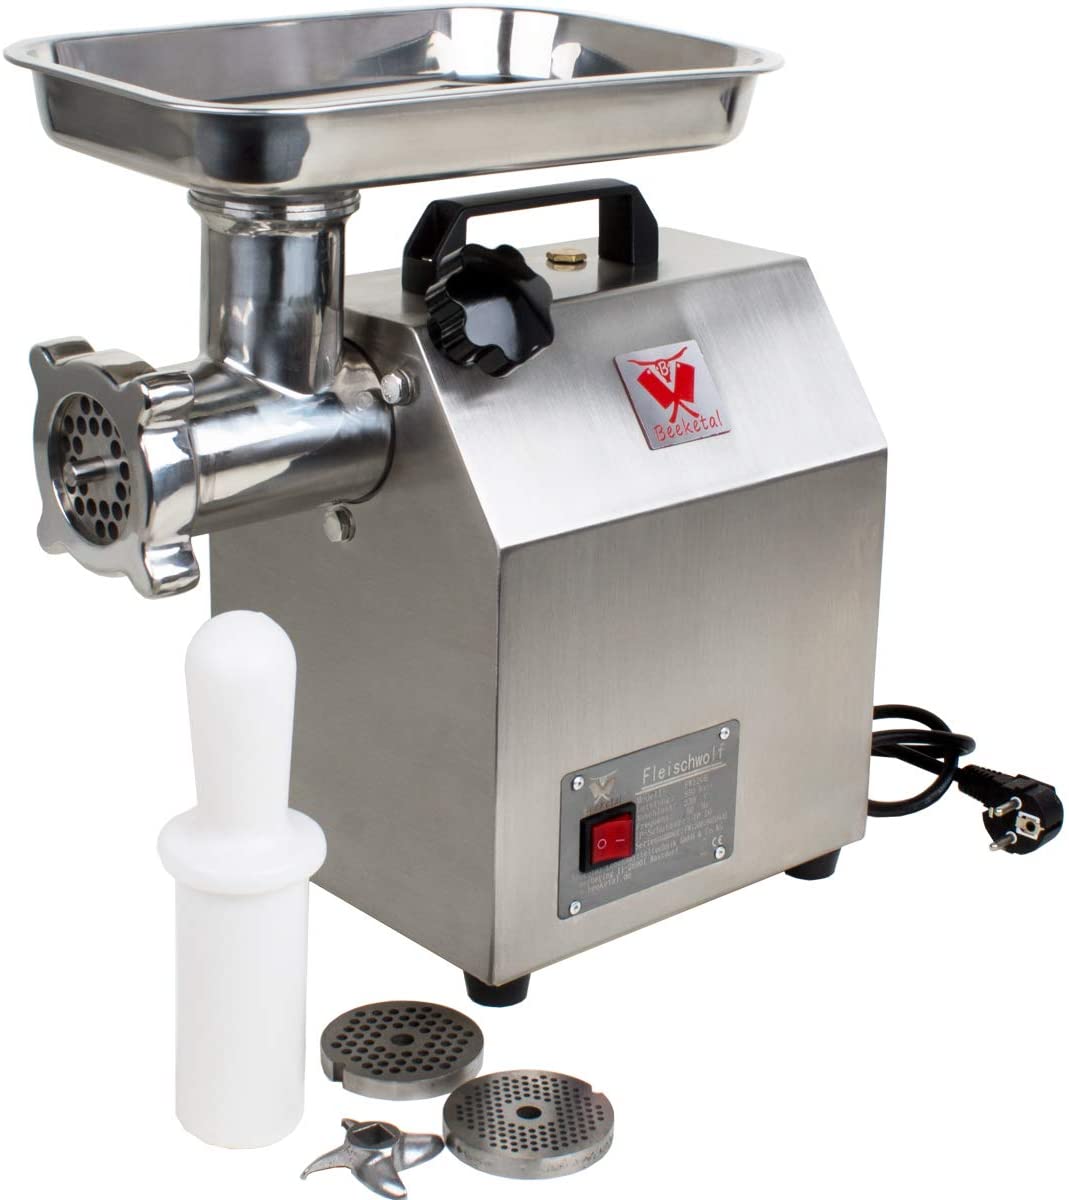 Beeketal FWB Series Professional Gastro Stainless Steel Mincers - up to 220 kg per Hour Throughput, 1 Speed, Carrying Handle, Including 2 x Blades, 3 x Perforated Discs (3, 5 and 8 mm), Stopper